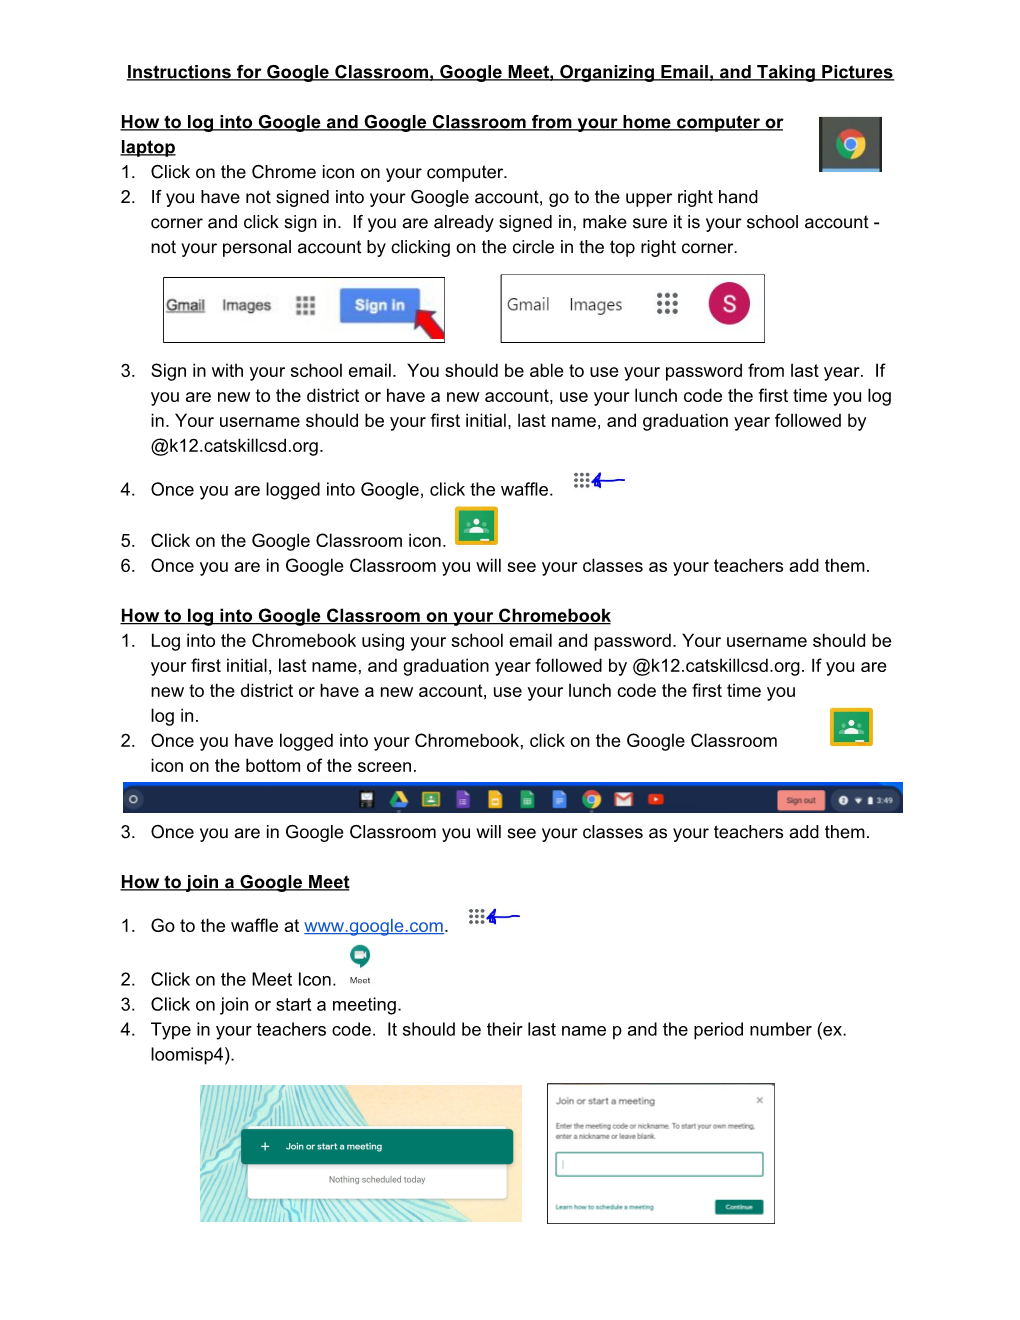 Instructions for Google Classroom, Google Meet, Organizing Email, and Taking Pictures